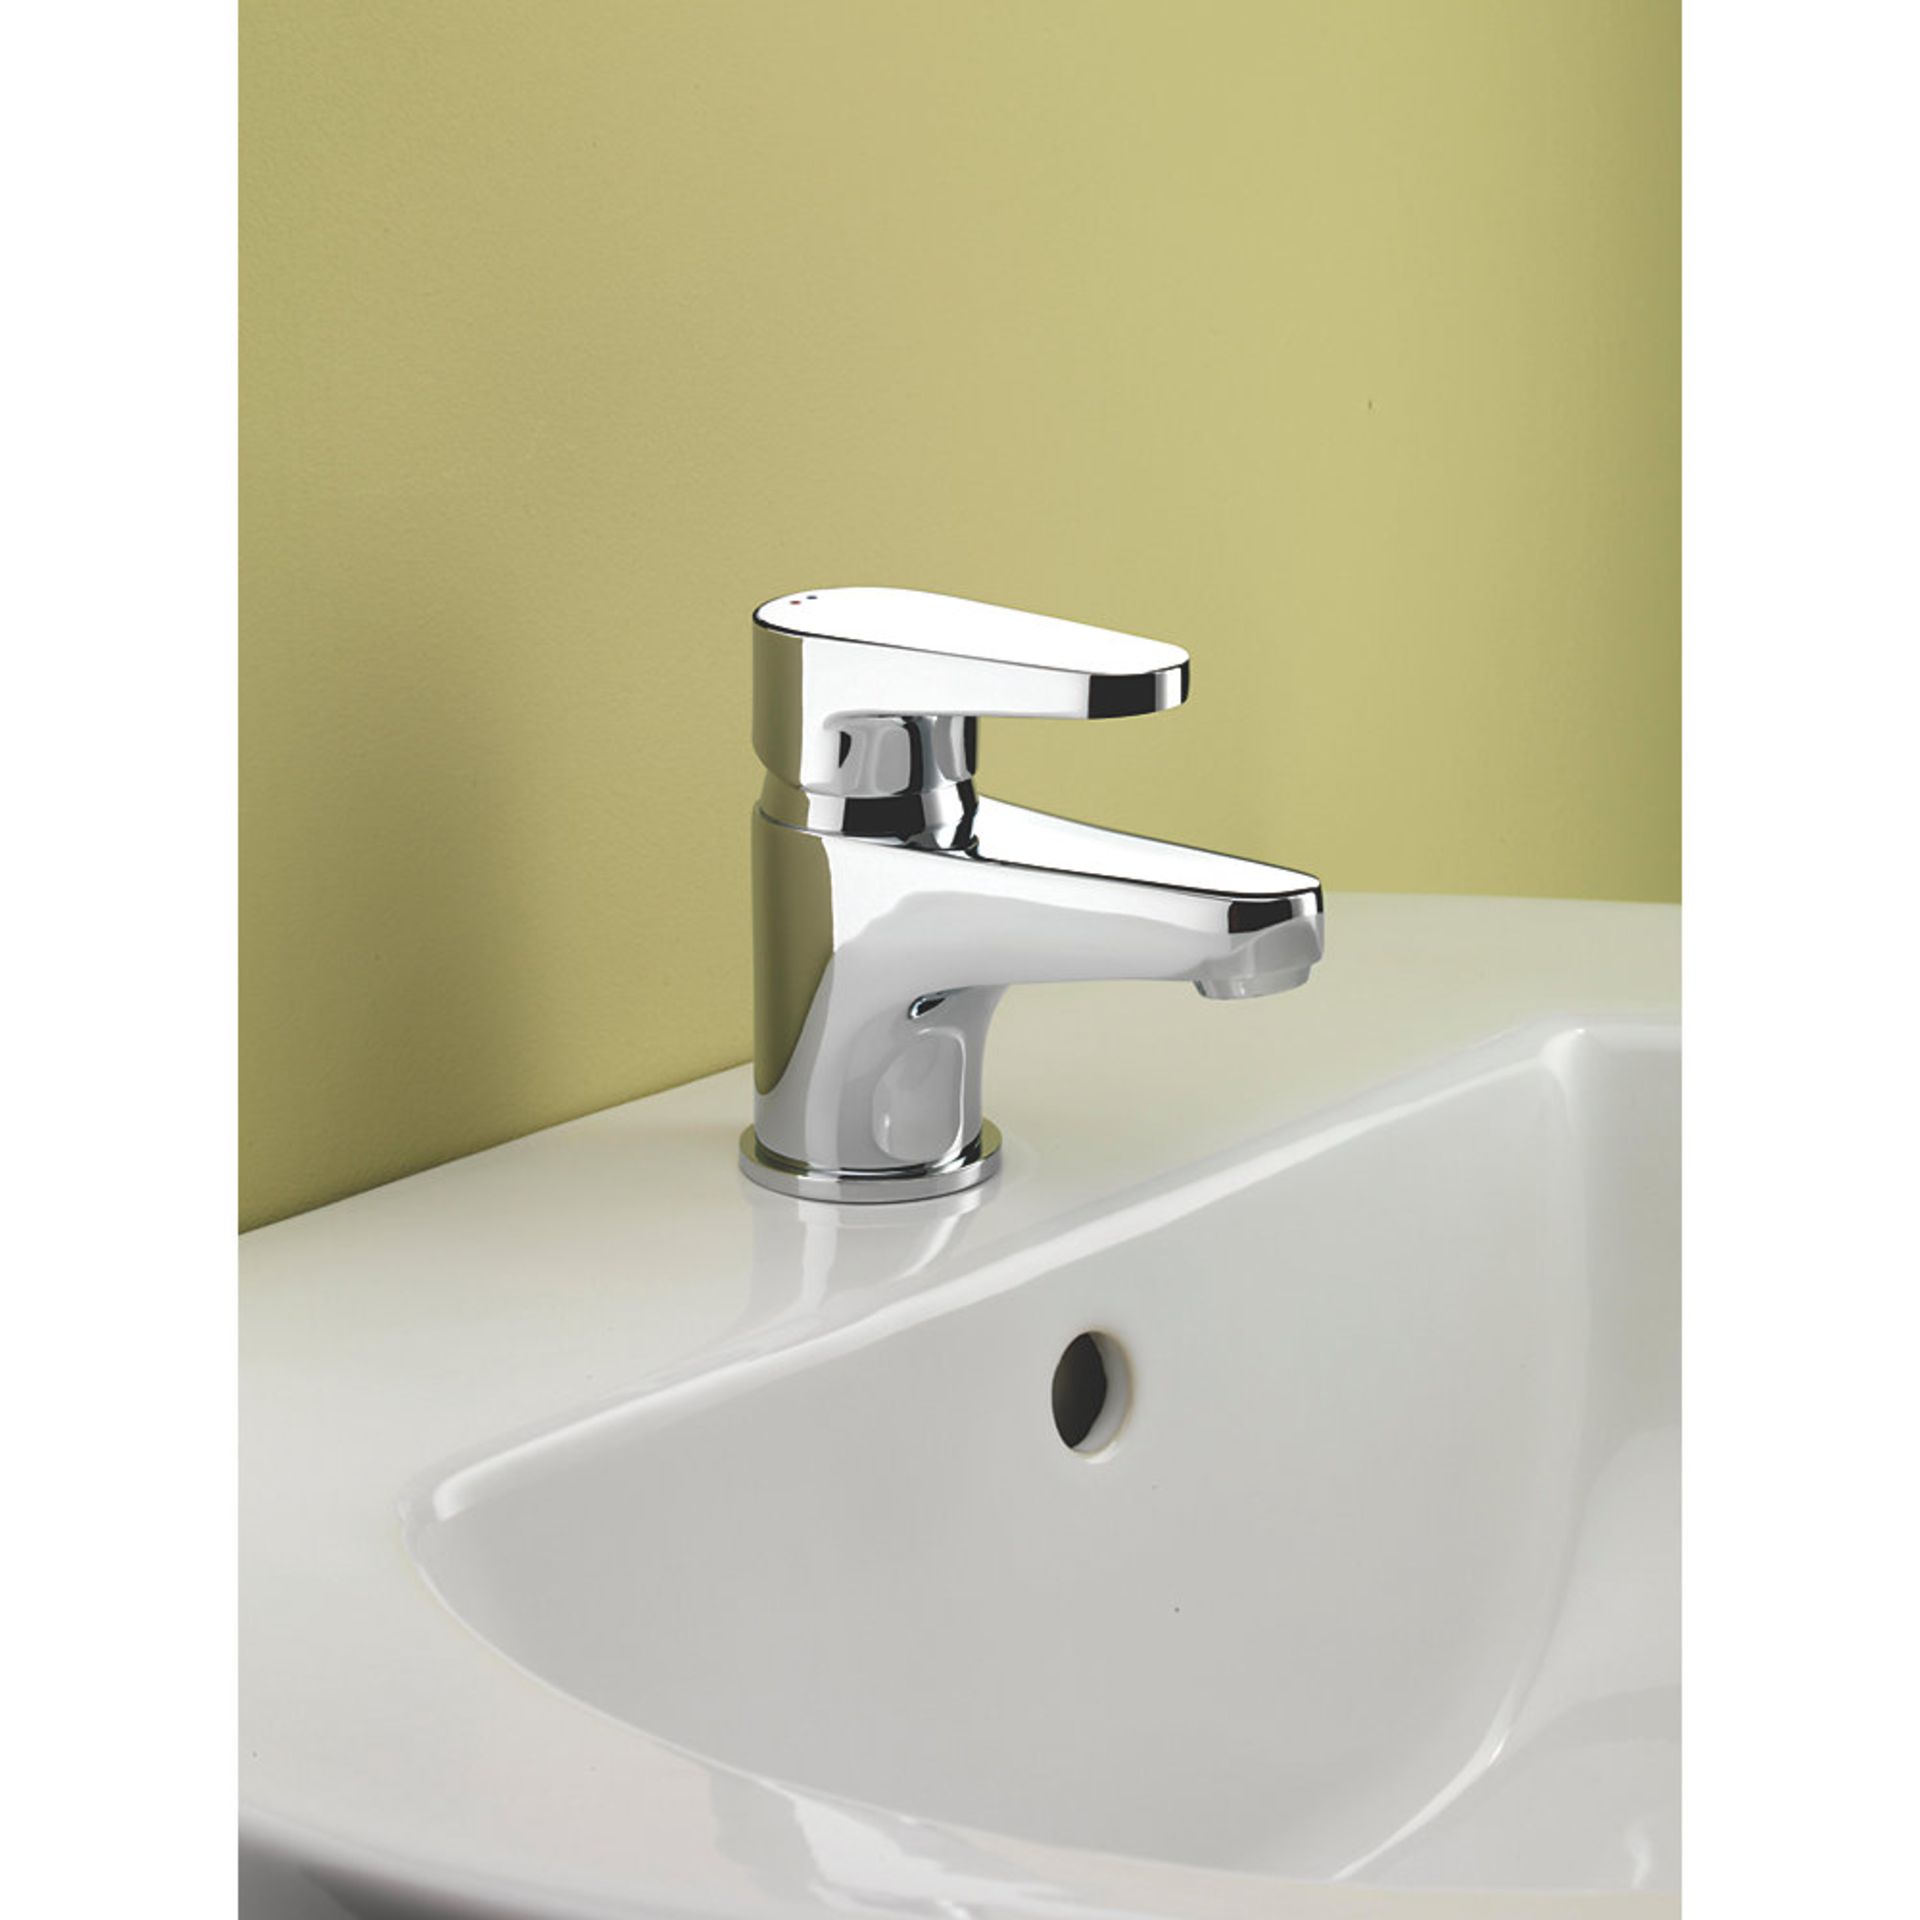 (PP192) Bristan Quest Bathroom Basin Mono Mixer Tap with Click Waste. Chrome-plated brass. - Image 4 of 4